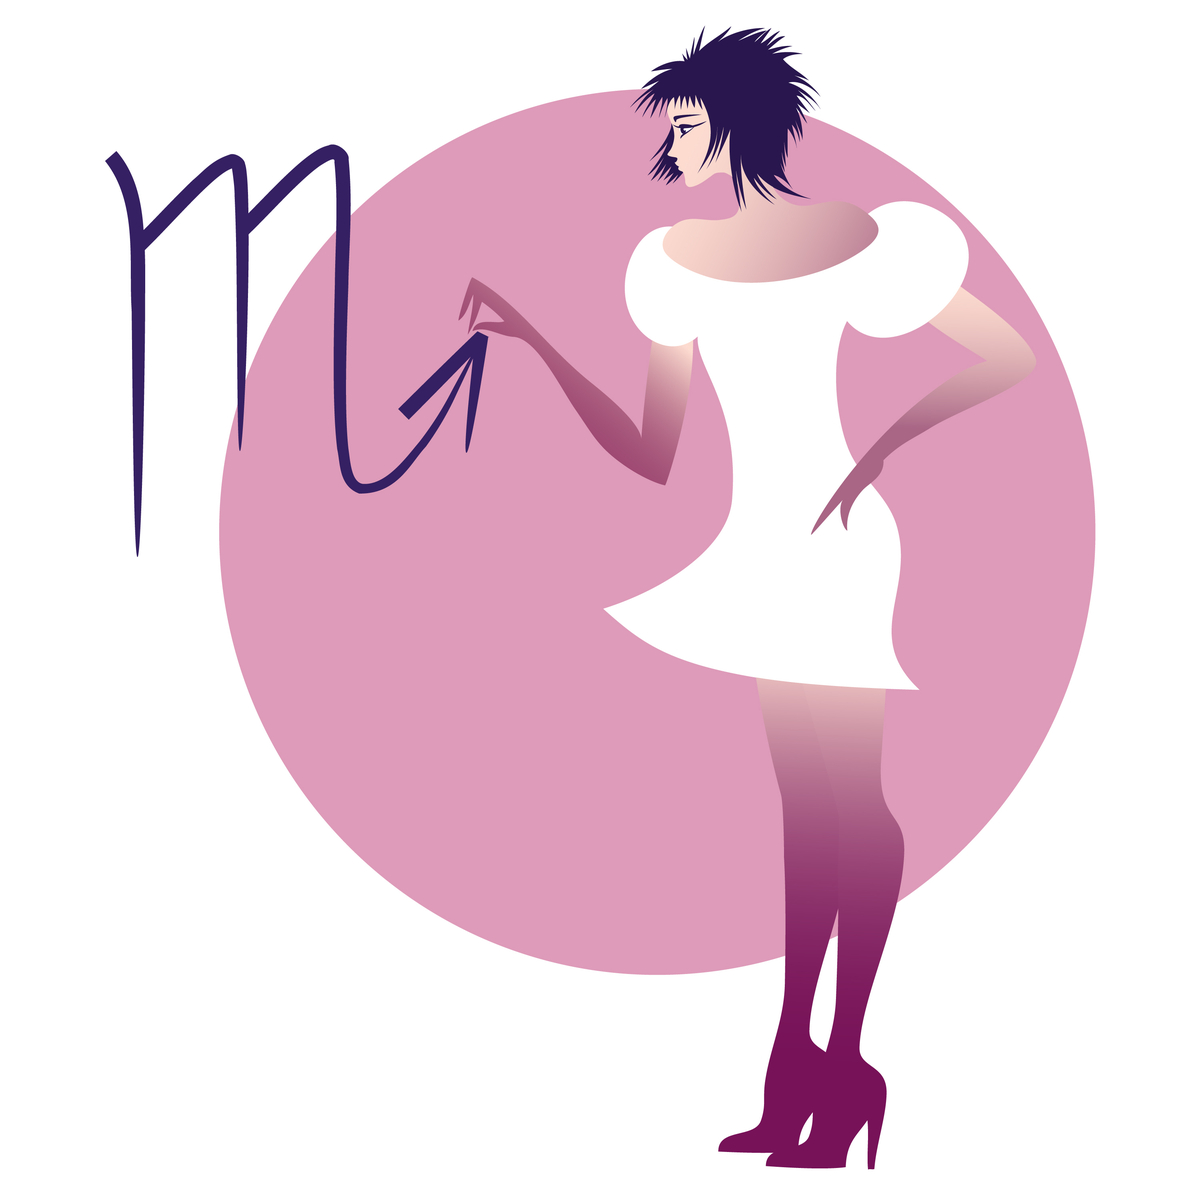 Woman with white dress and purple stockings standing with her hand on the Scorpio Zodiac Sign next to her.